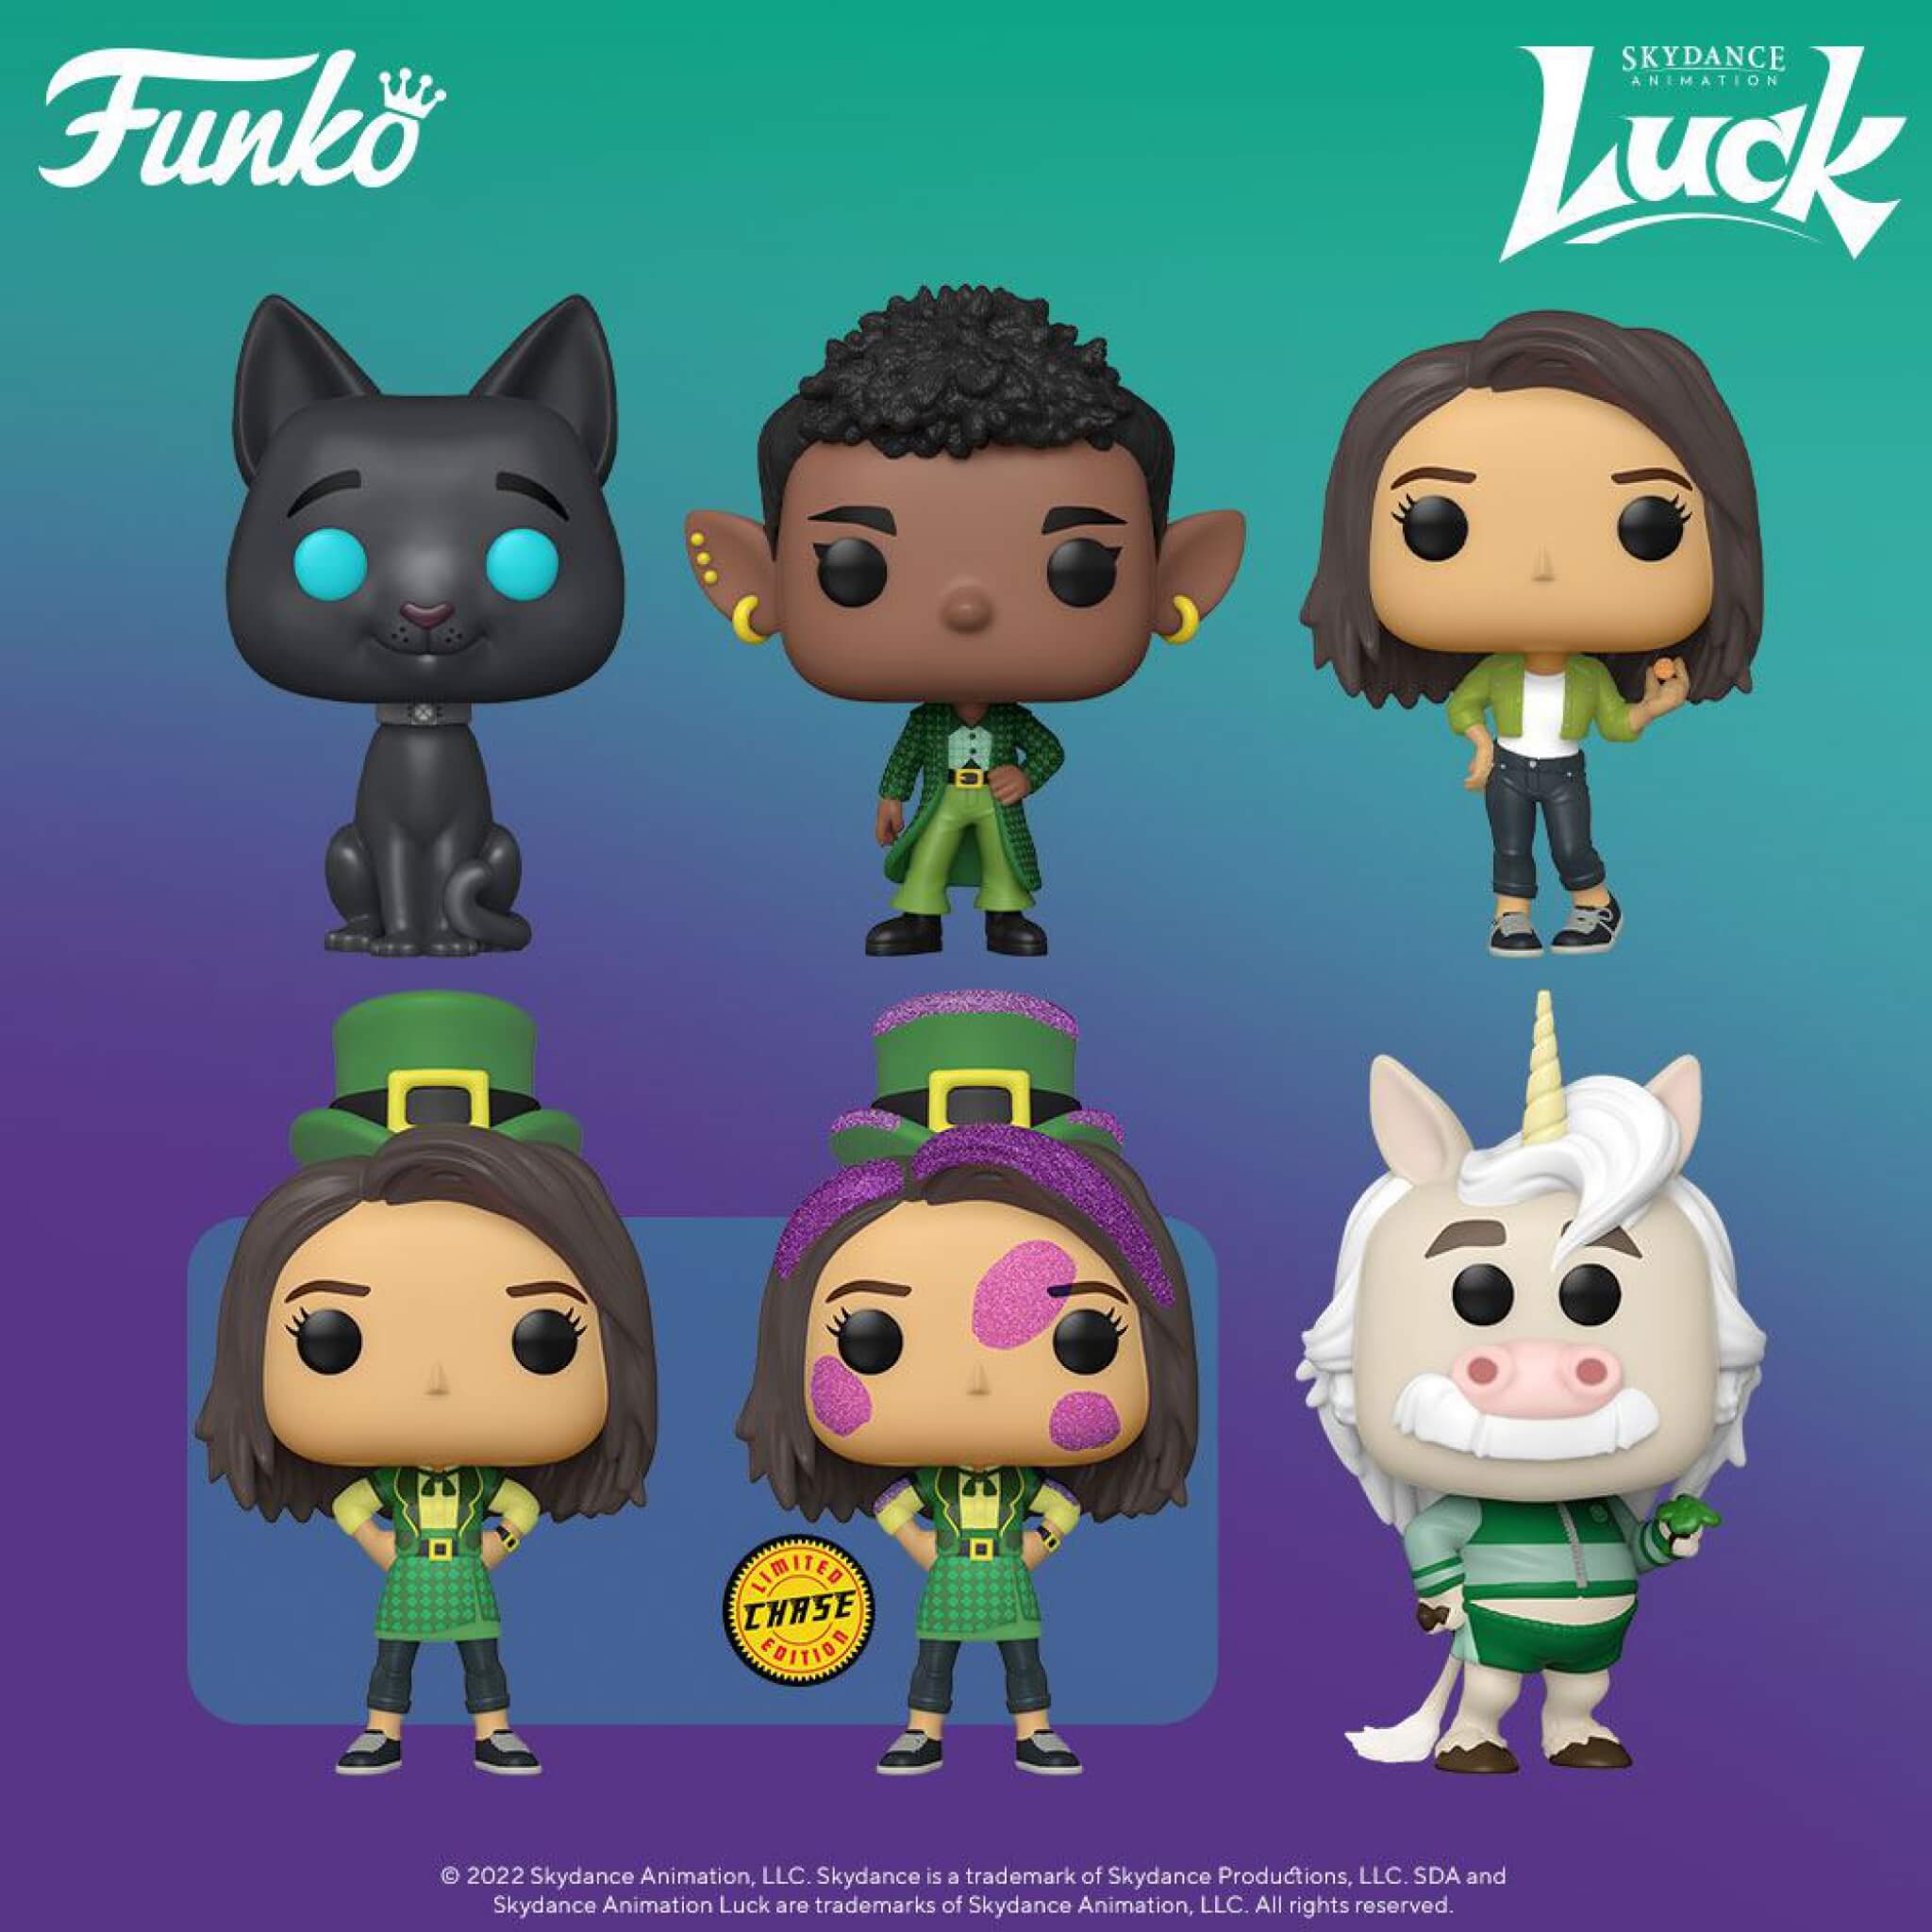 POPs from the movie Luck are here